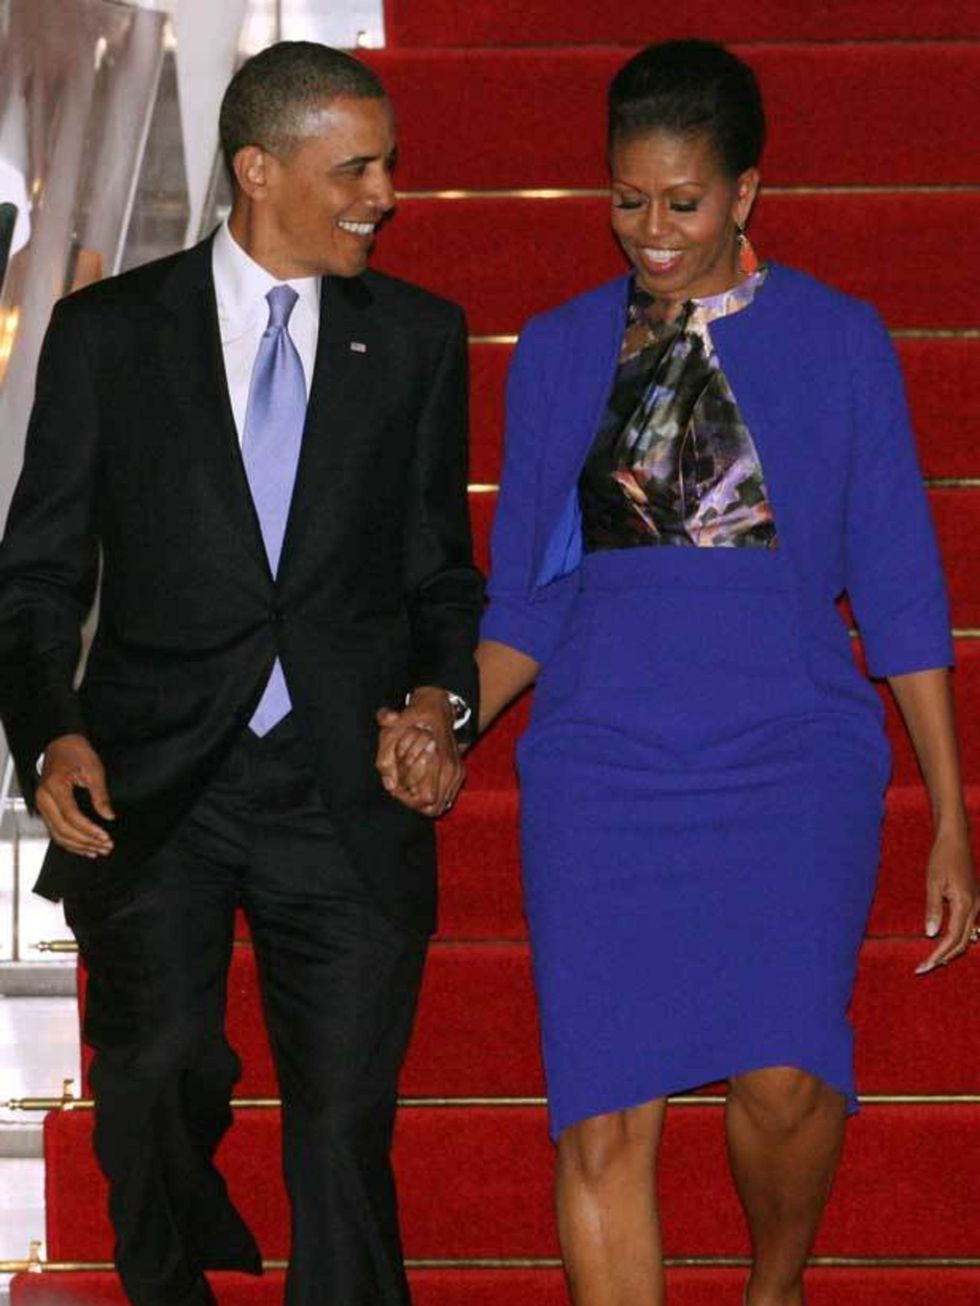 <p><a href="http://www.elleuk.com/starstyle/style-files/(section)/michelle-obama">Michelle Obama</a> wore a <a href="http://www.elleuk.com/catwalk/collections/preen/autumn-winter-2011/review">Preen</a> cropped jacket, matching high-waist pencil skirt &amp